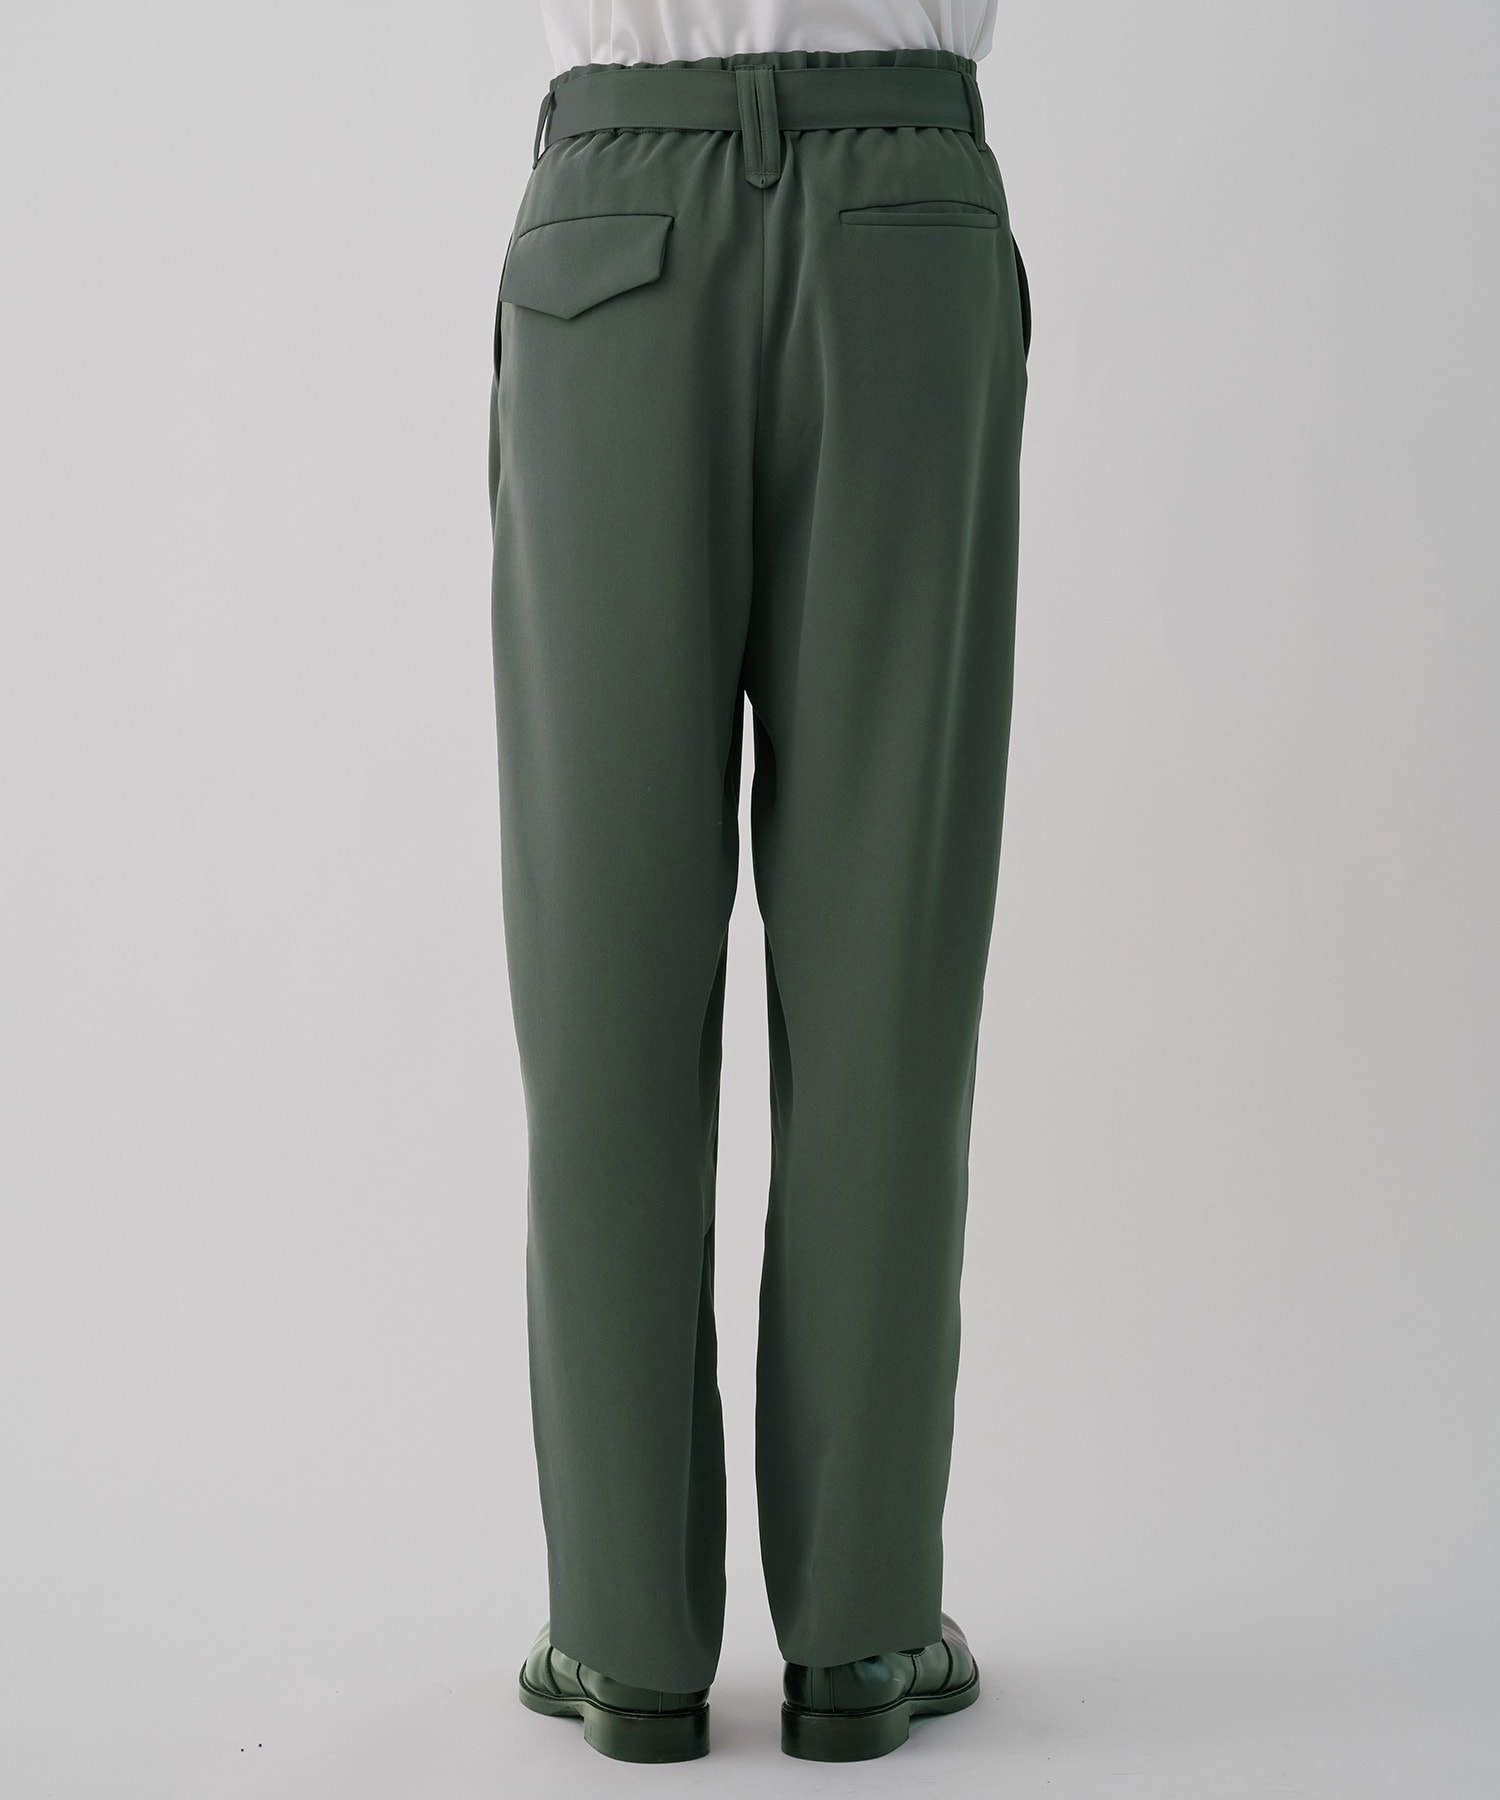 Double Cloth 2 Tuck Wide Pants with Long Belt CULLNI